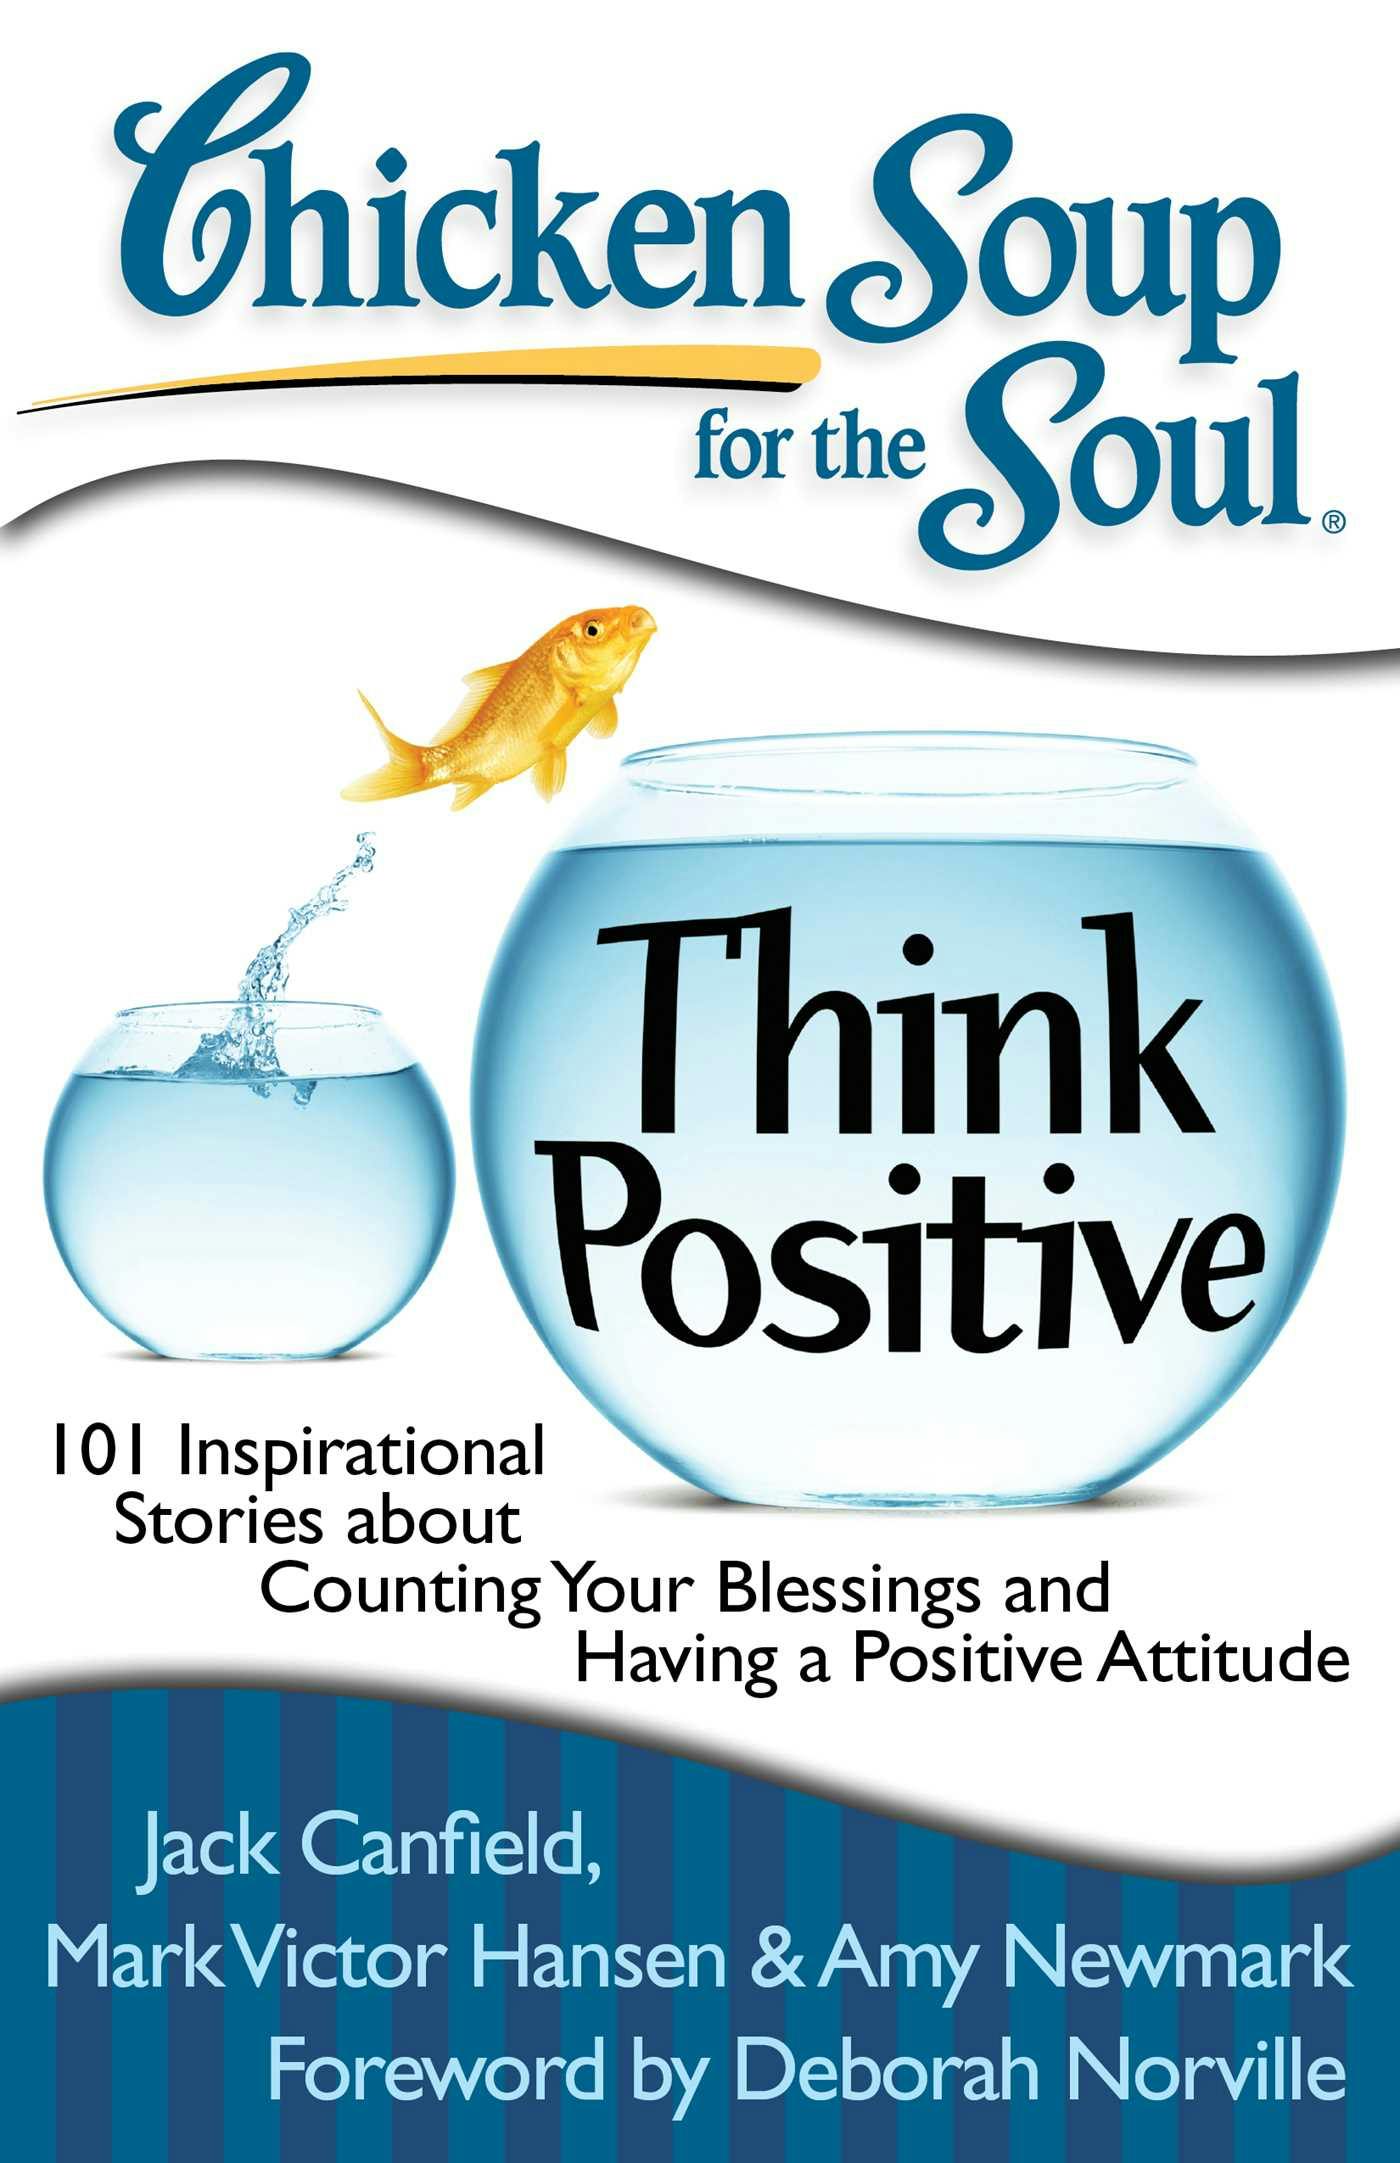 Chicken Soup for the Soul: Think Positive: 101 Inspirational Stories about Counting Your Blessings and Having a Positive Attitude - Mark Victor Hansen, Jack Canfield, Amy Newmark